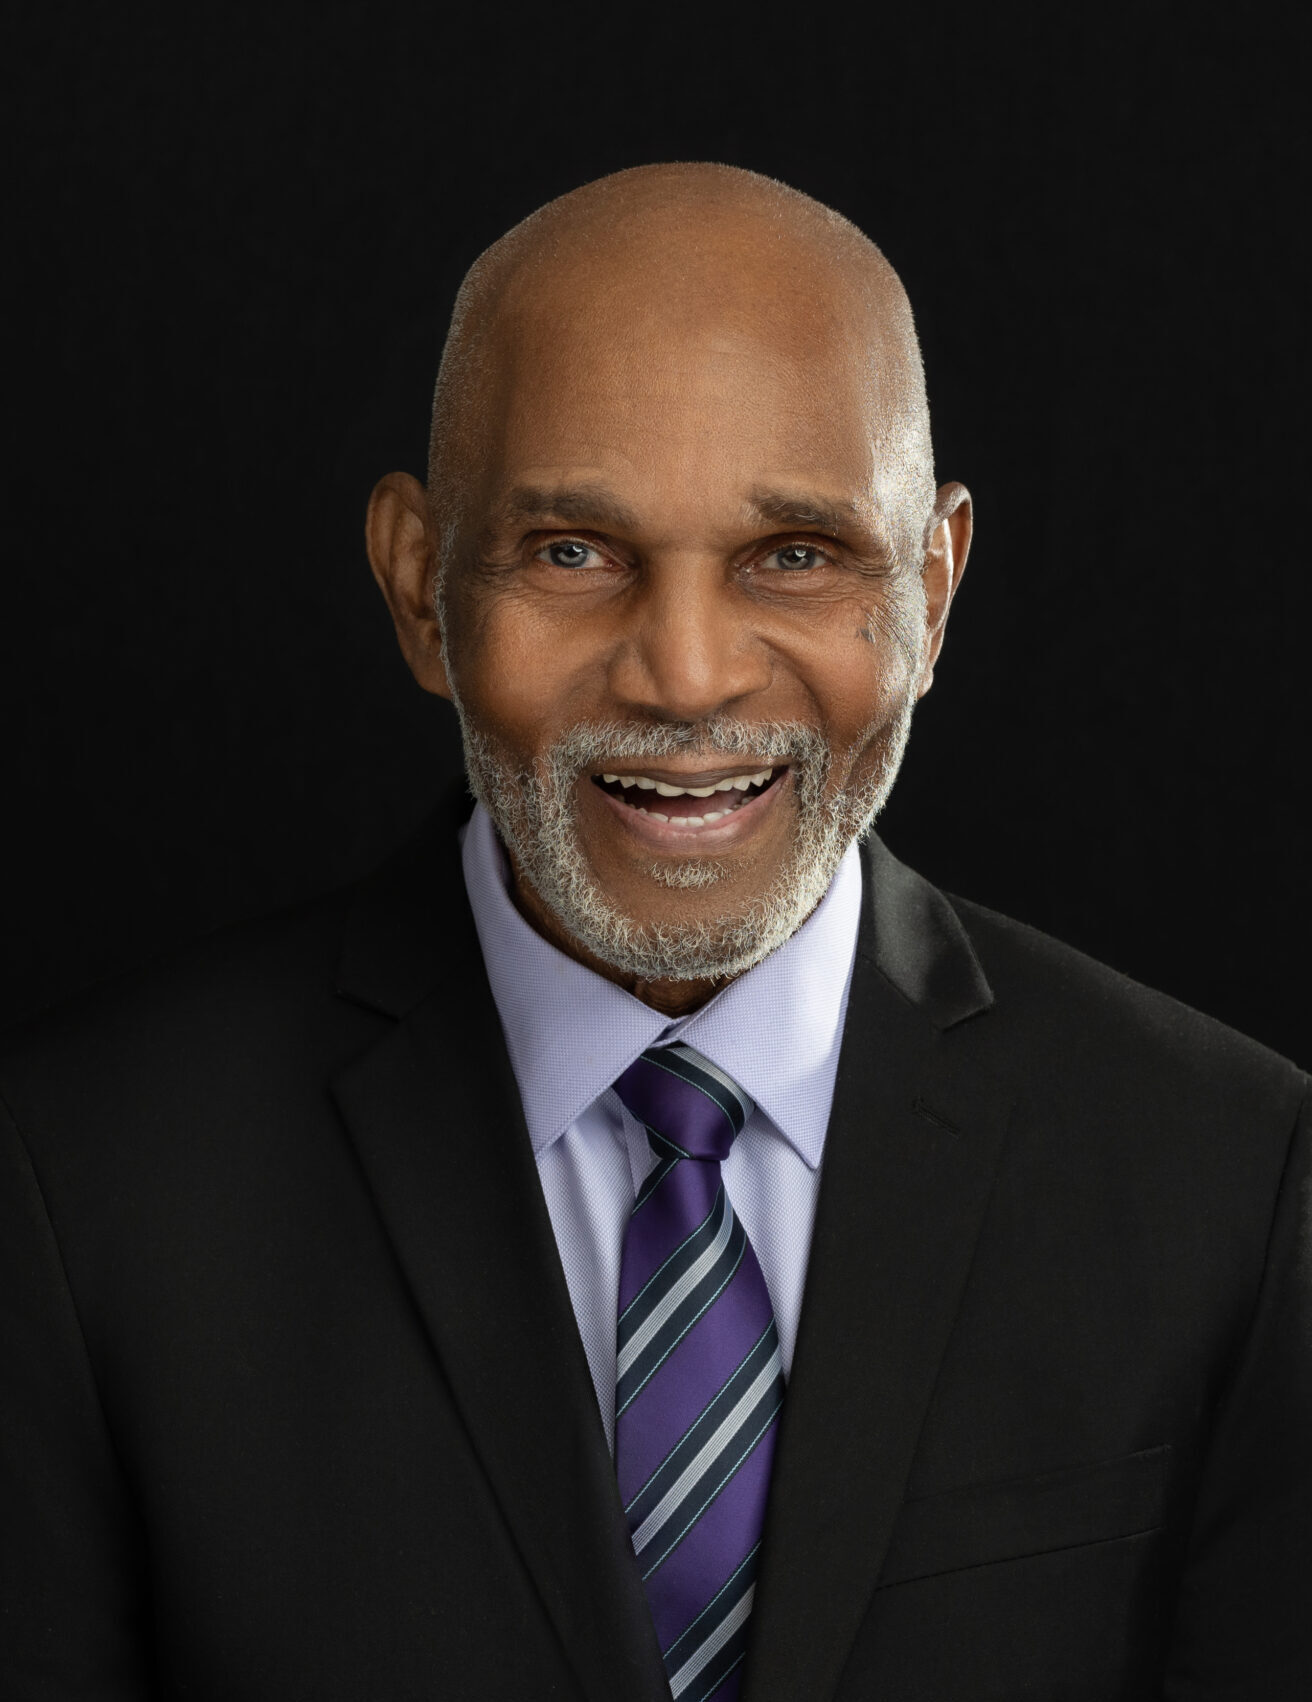 Professional Corporate Headshot taken of Professor Melvin Rahming, from Morehouse College - taken by PWG LENS. Corporate Headshot Photographer